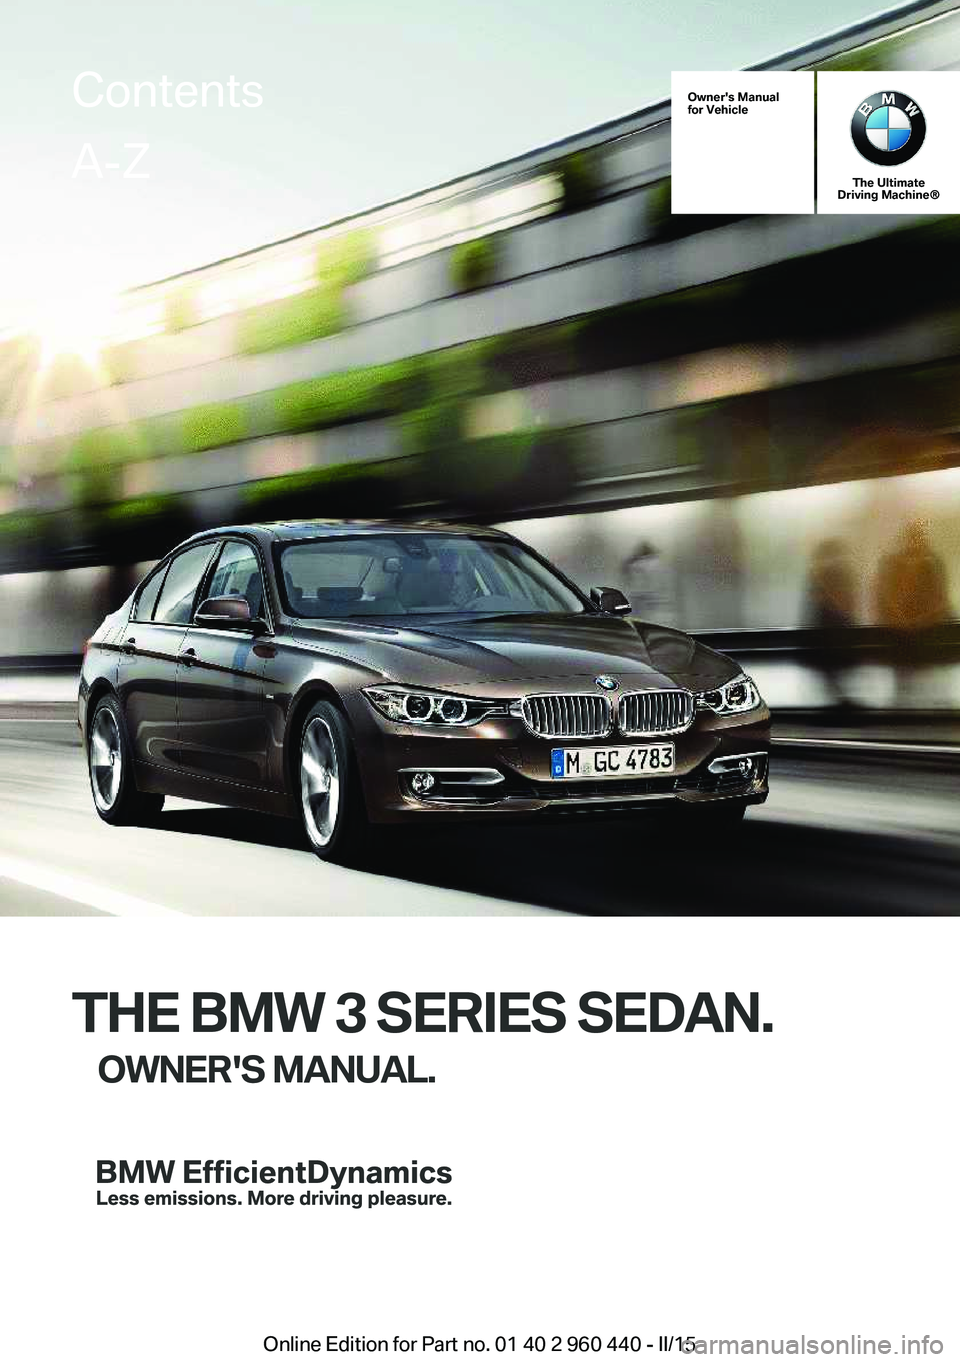 BMW 328I XDRIVE SEDAN 2016  Owners Manual Owner's Manual
for Vehicle
The Ultimate
Driving Machine®
THE BMW 3 SERIES SEDAN.
OWNER'S MANUAL.
ContentsA-Z
Online Edition for Part no. 01 40 2 960 440 - II/15   